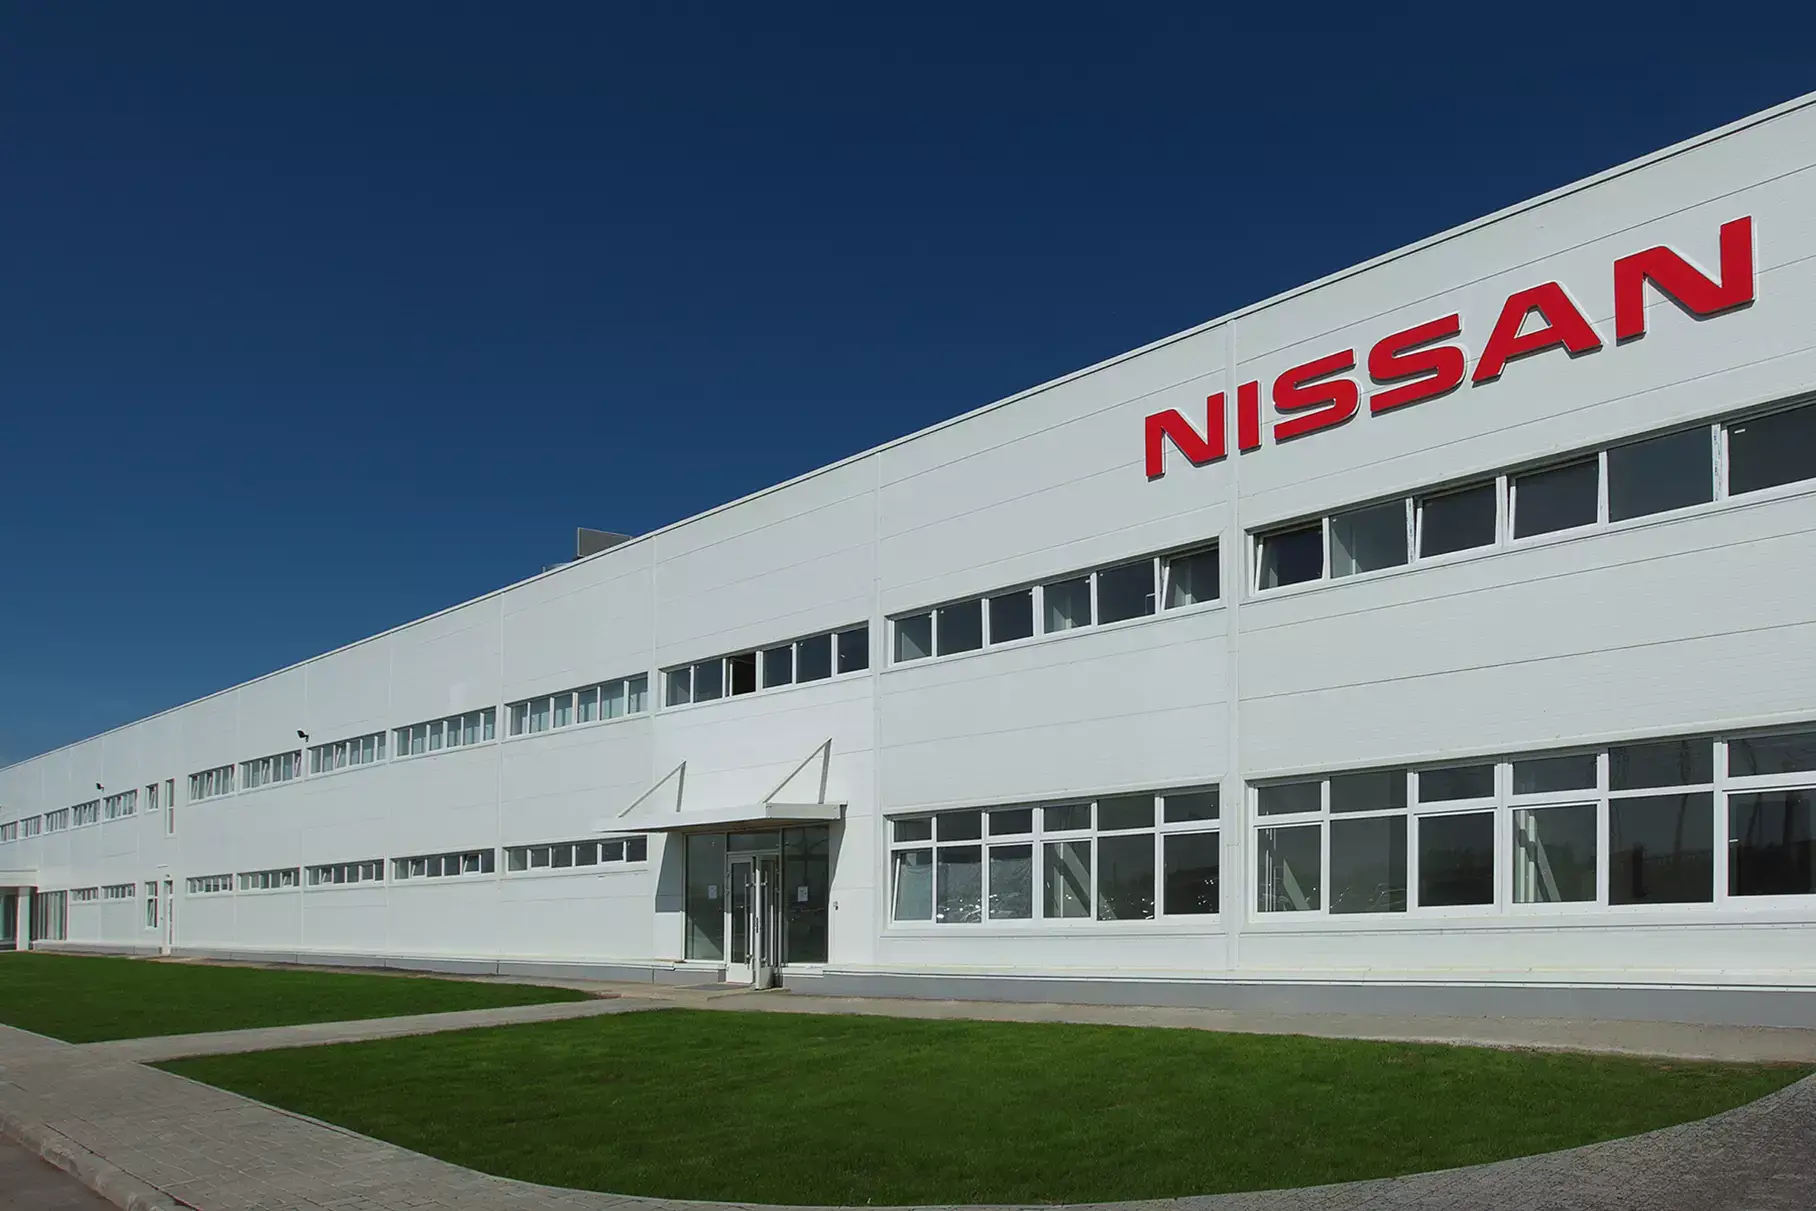 A third of the employees of the former Nissan plant in Russia were sent to idle time